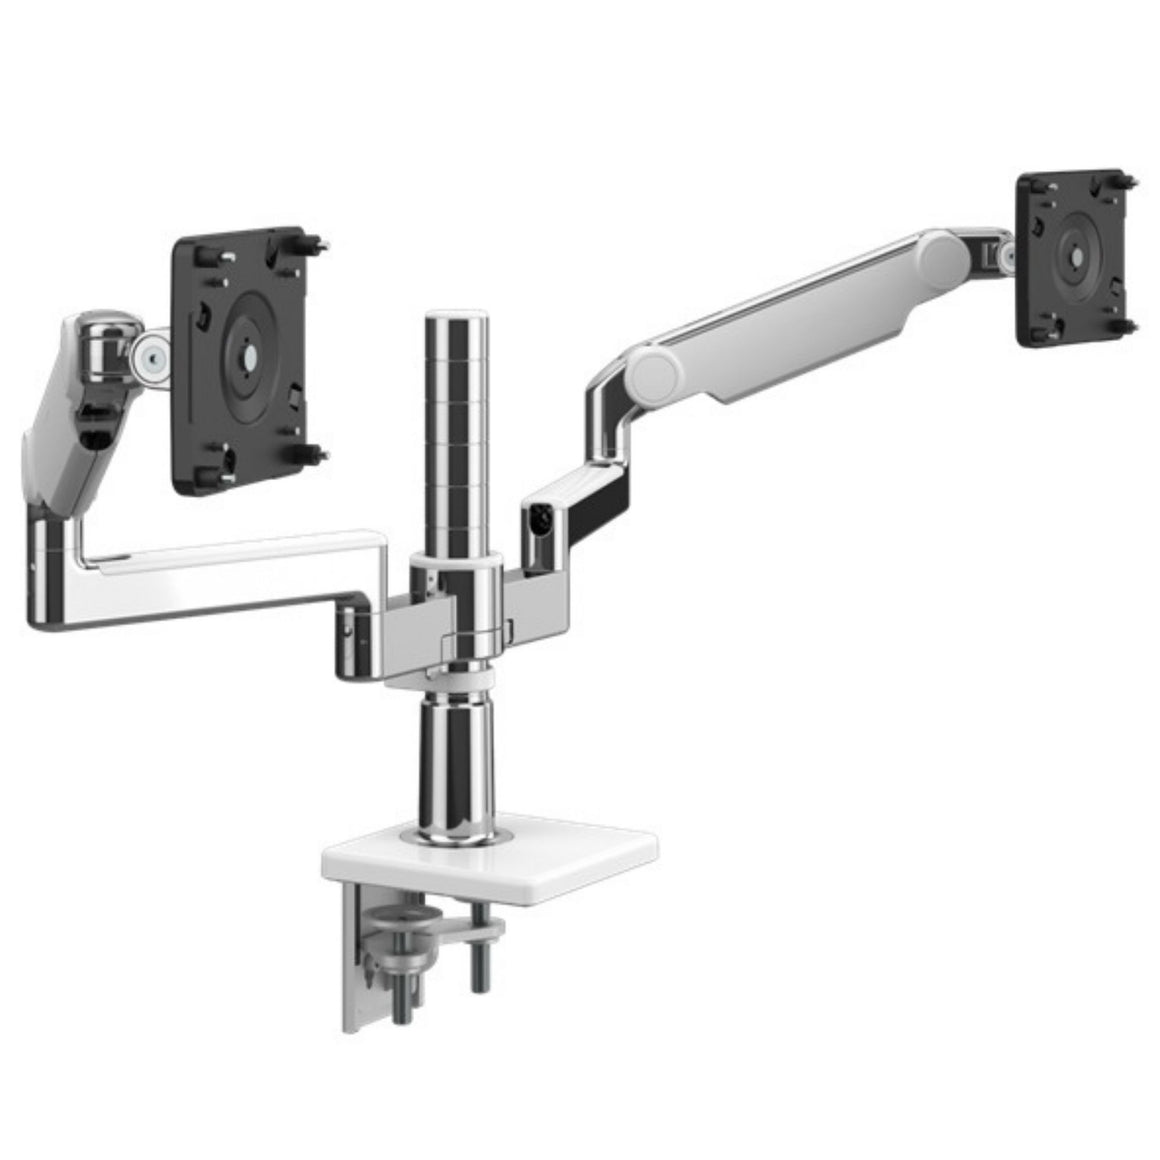 Humanscale M/Flex M2.1 Dual LCD Monitor Arm Straight Link/Dynamic Link